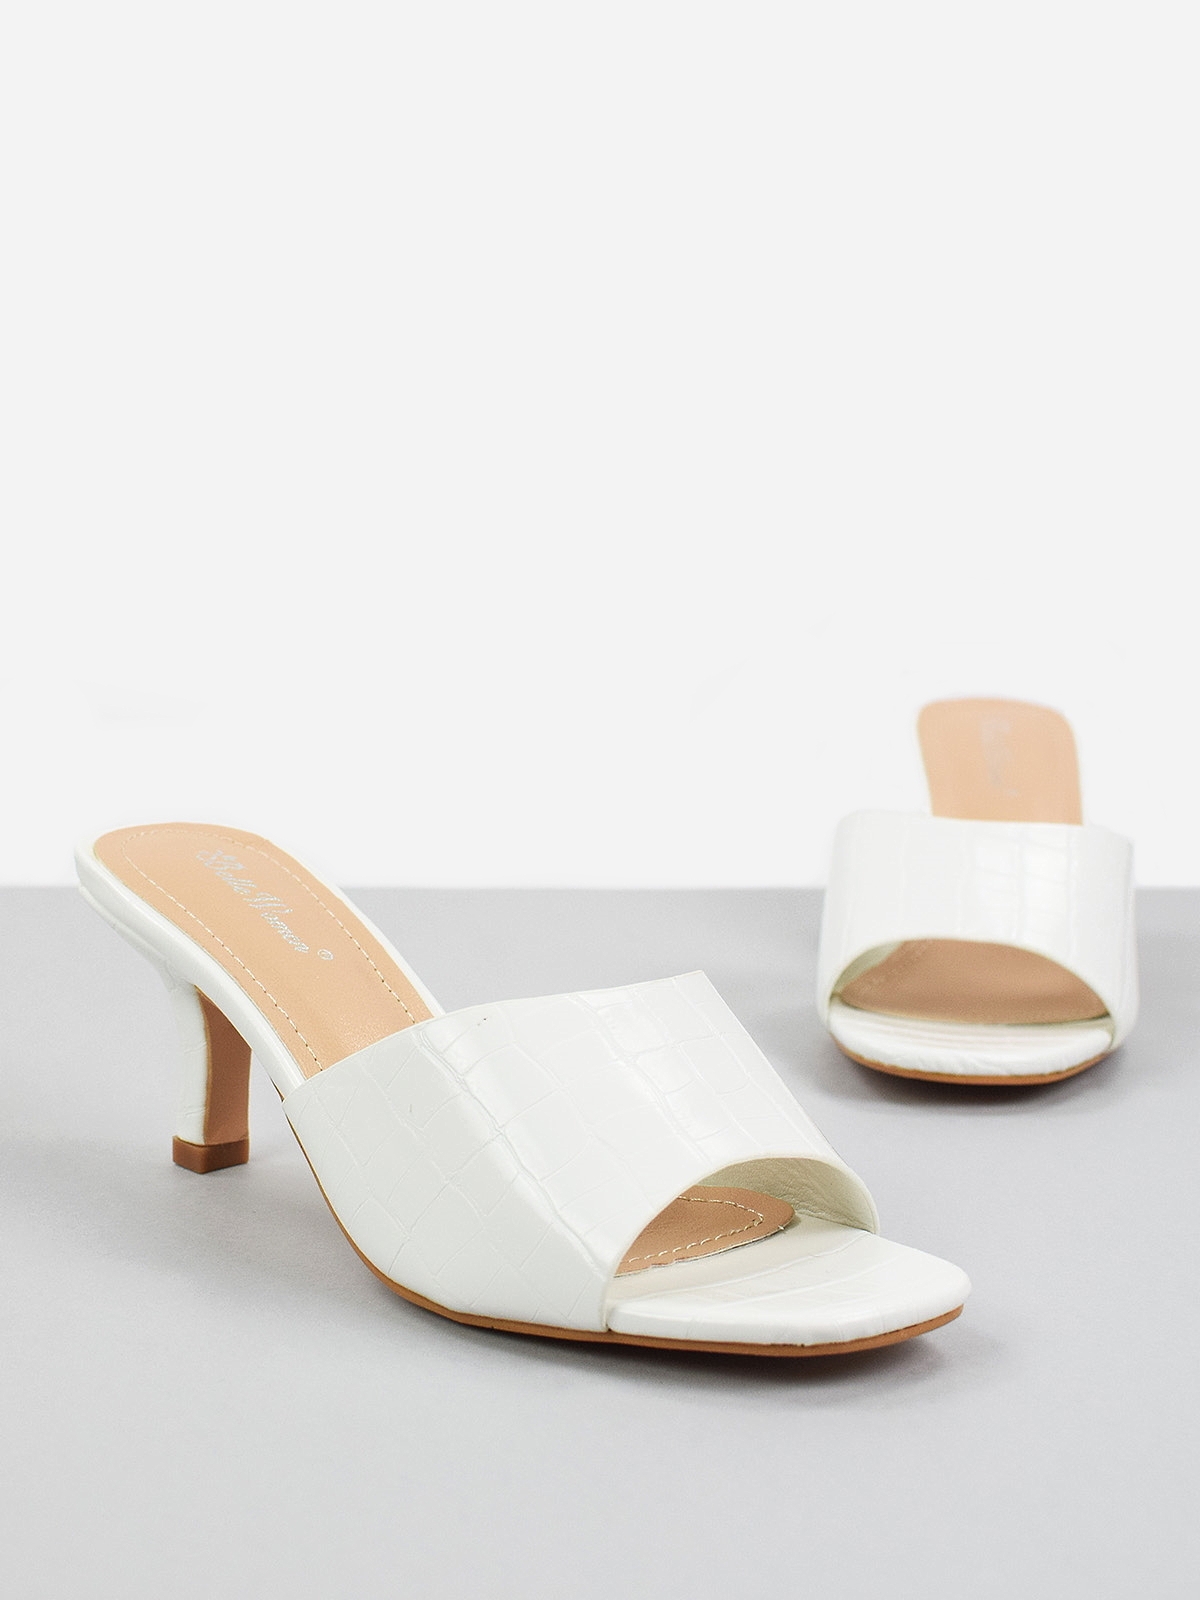 Mid heeled mule sandals in white